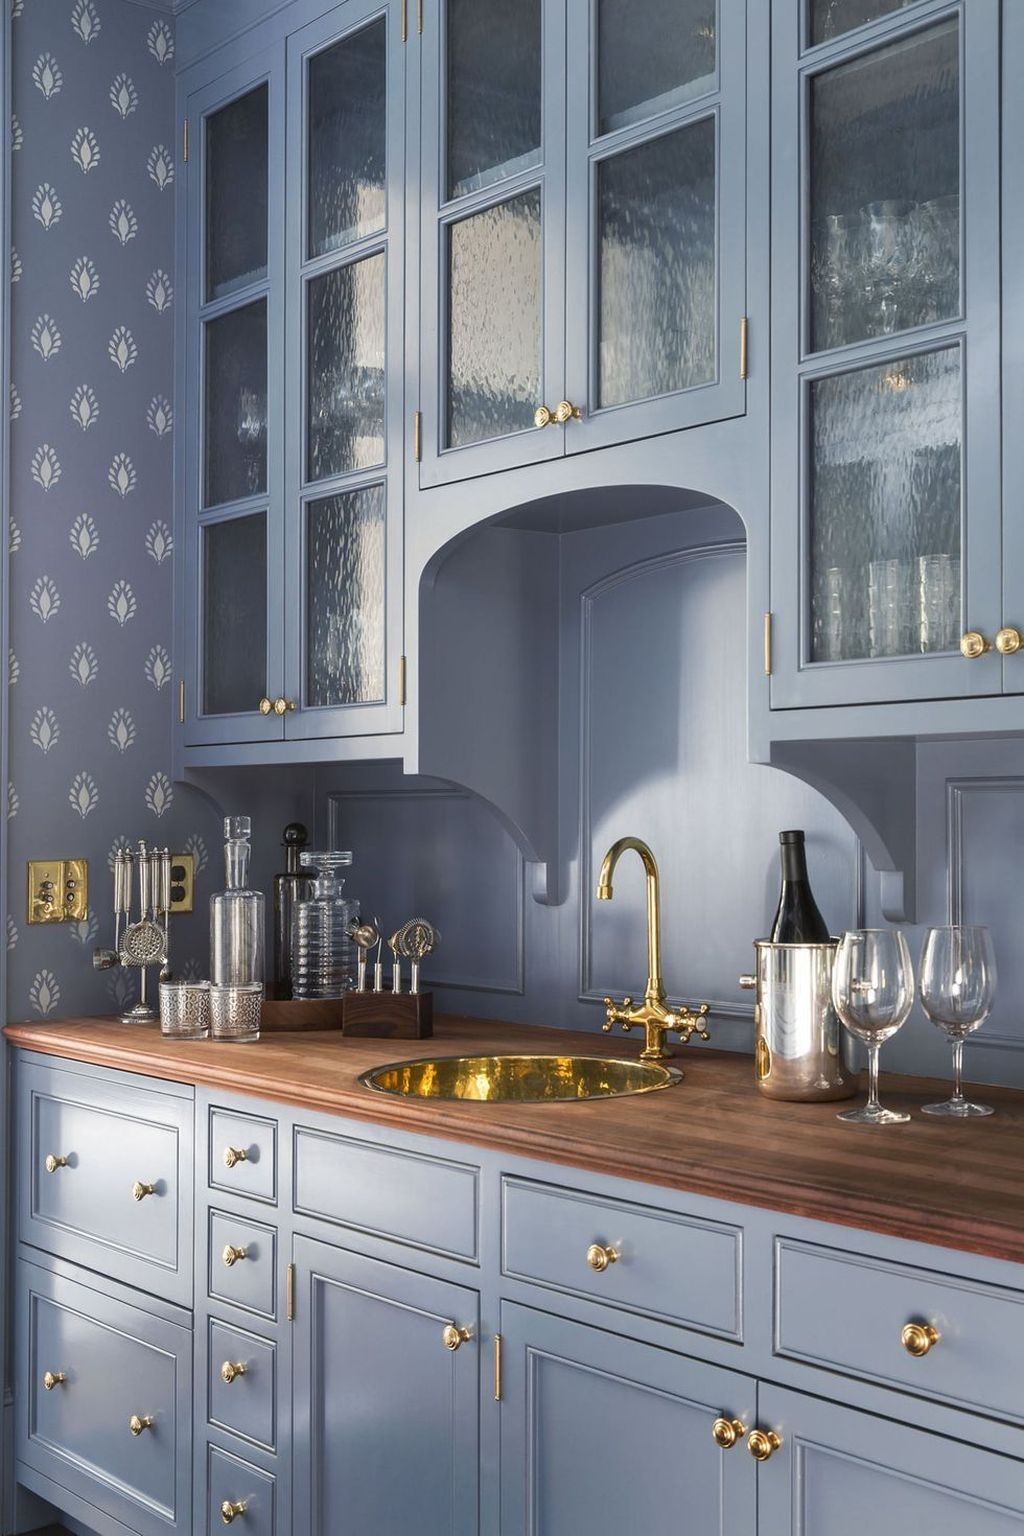 Cool Blue Kitchens Ideas For Inspiration 31